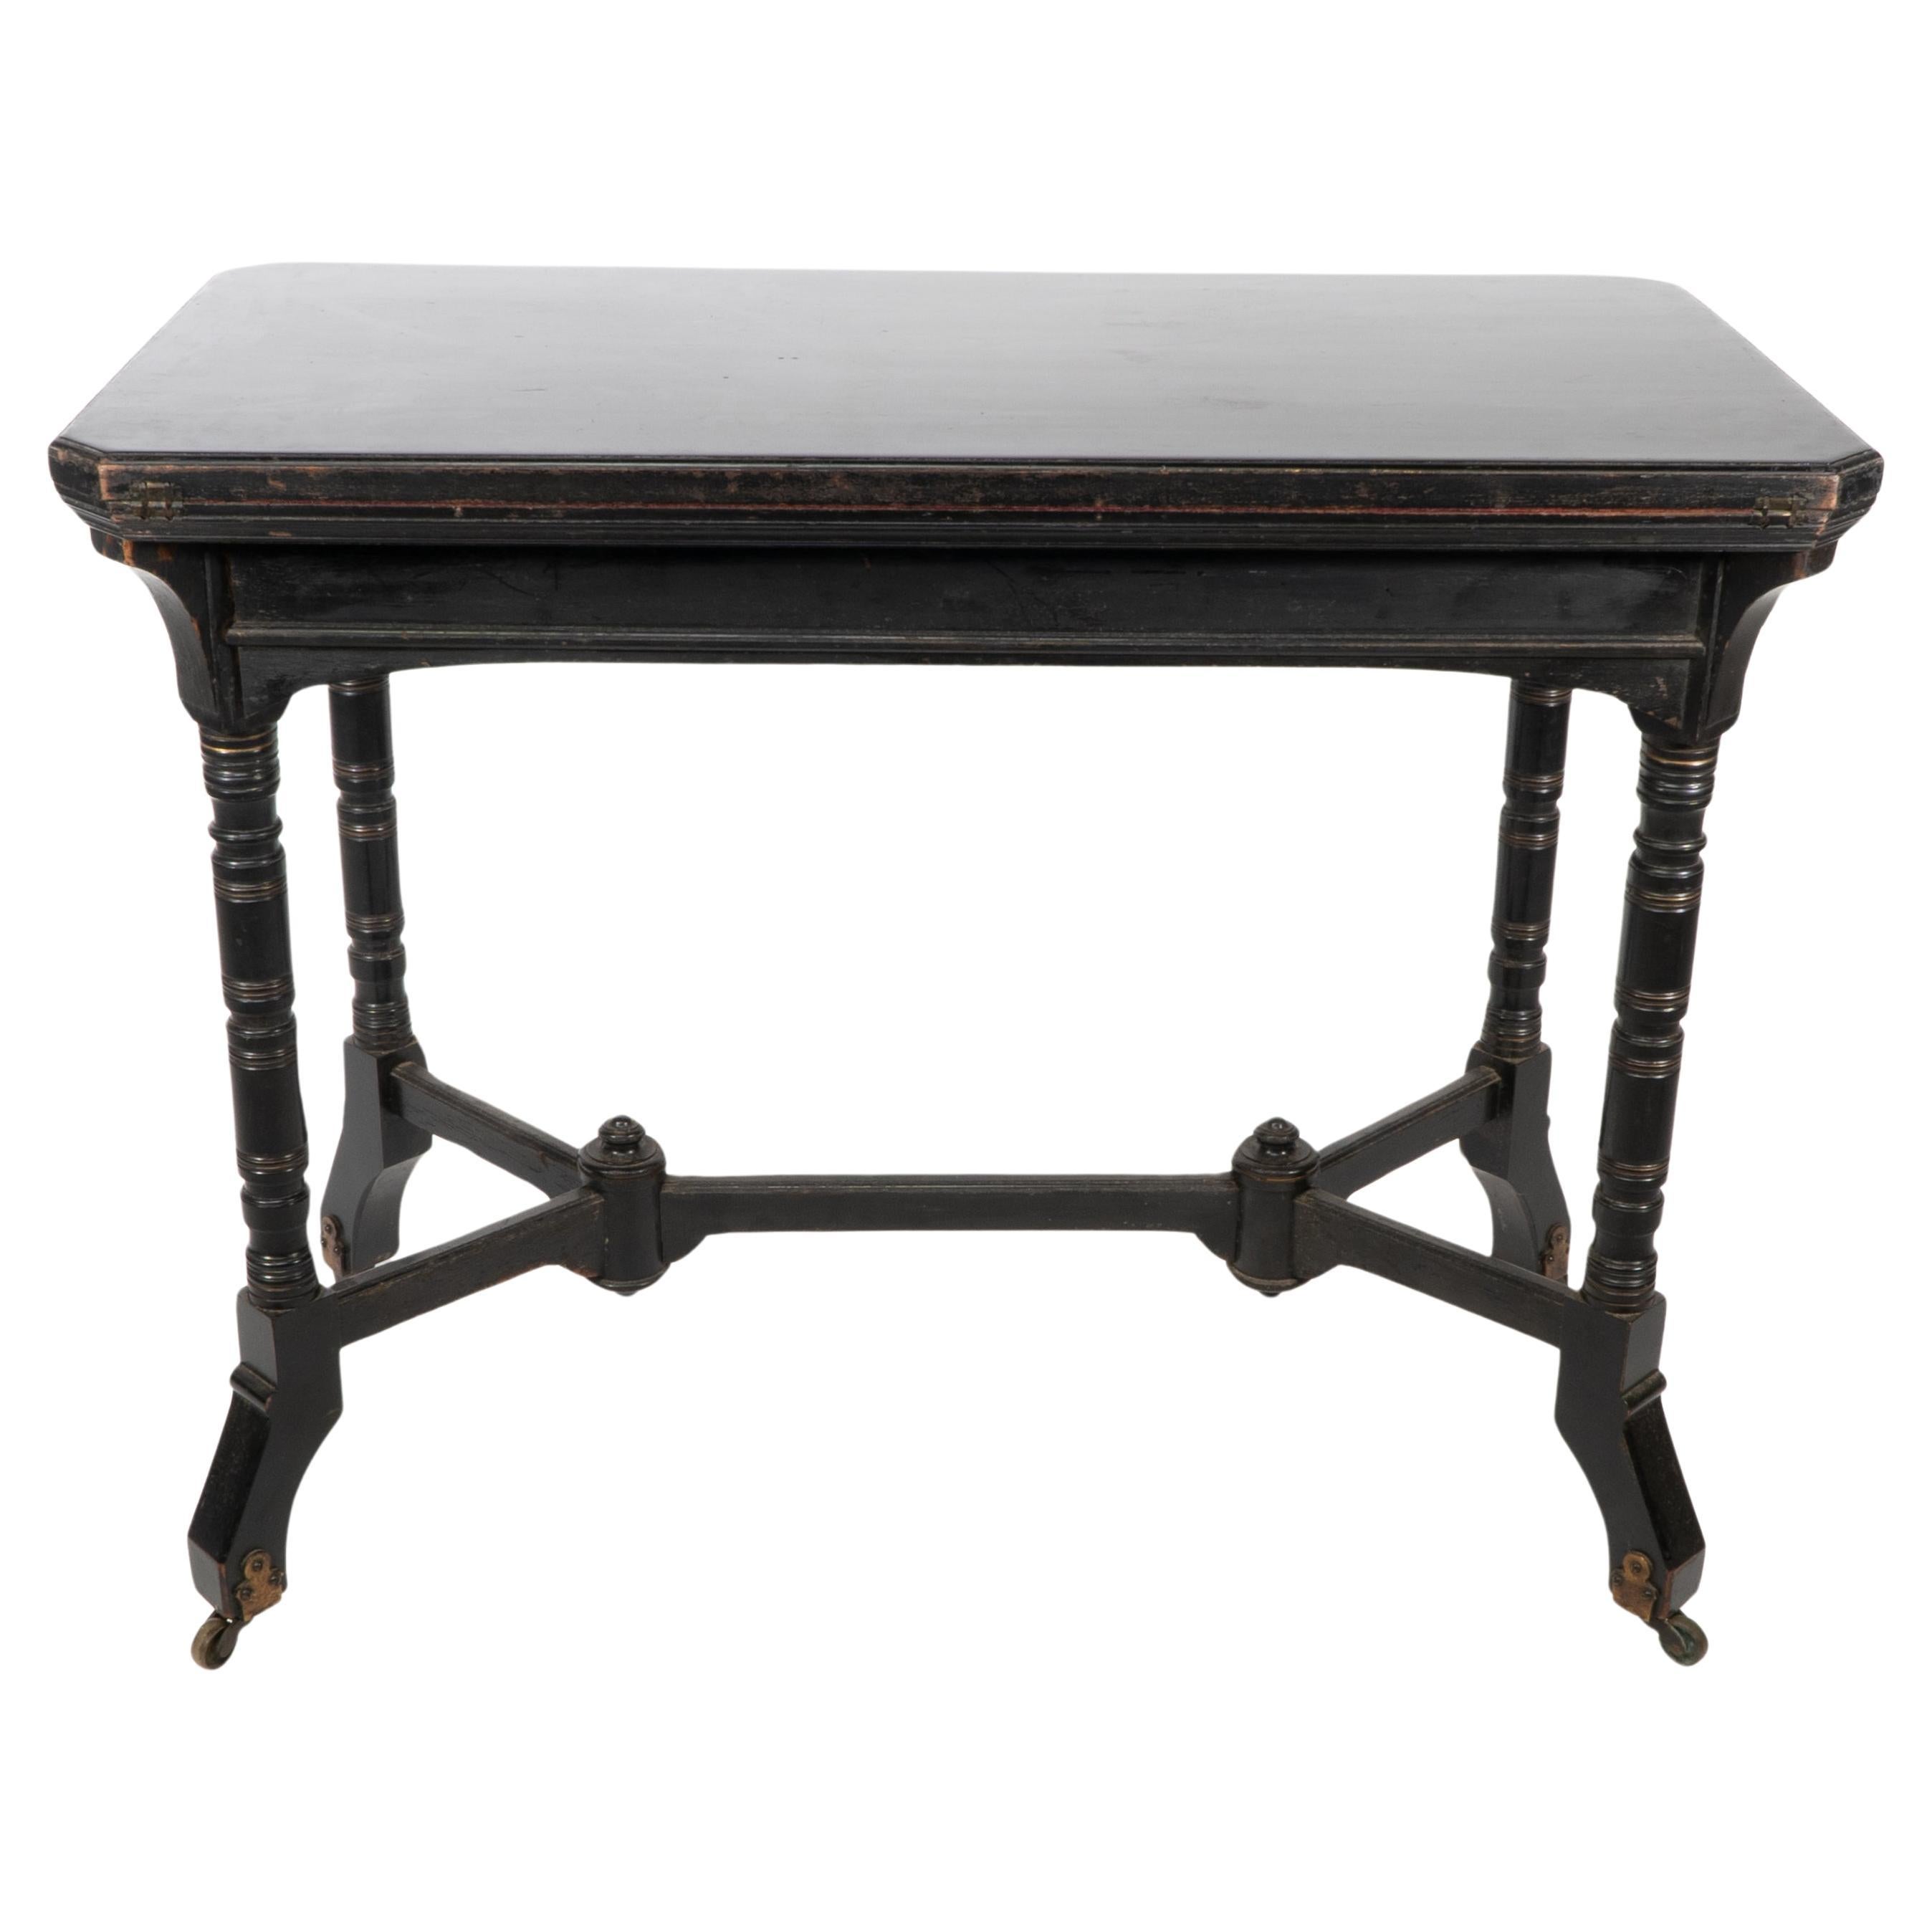 Charles Bevan, made by Marsh Jones and Cribb. An Aesthetic Movement Walnut ebonized card table with fold over top retaining the original red baize on turned legs united by a double wishbone stretcher on high decorative brass castors. Unfolded: H 72